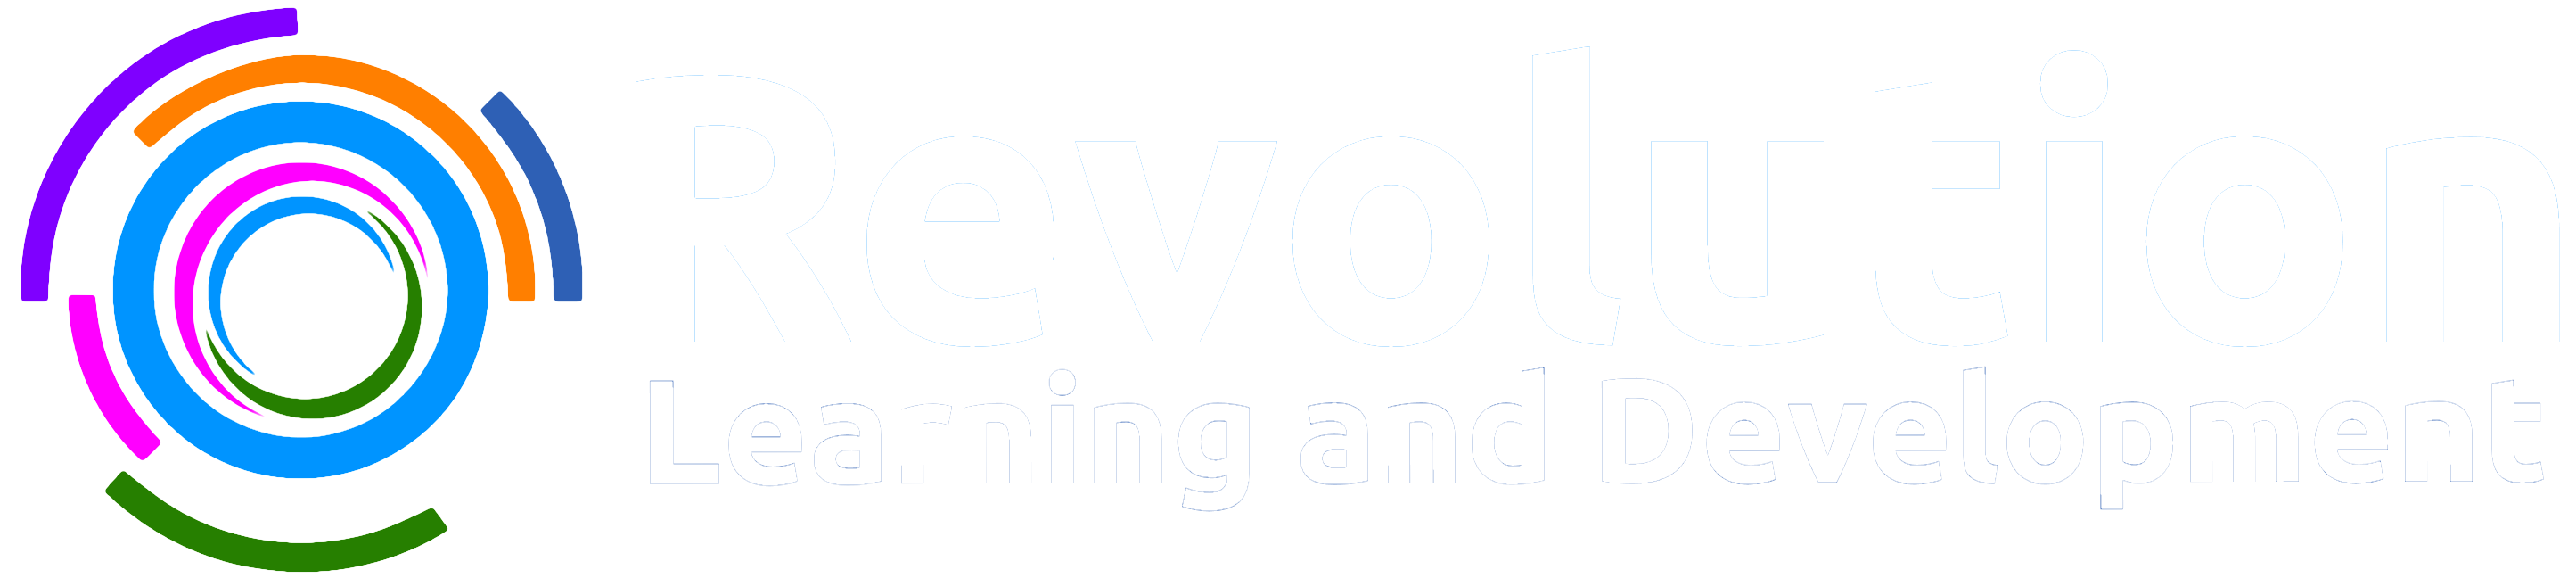 My Revolution Learning and Development